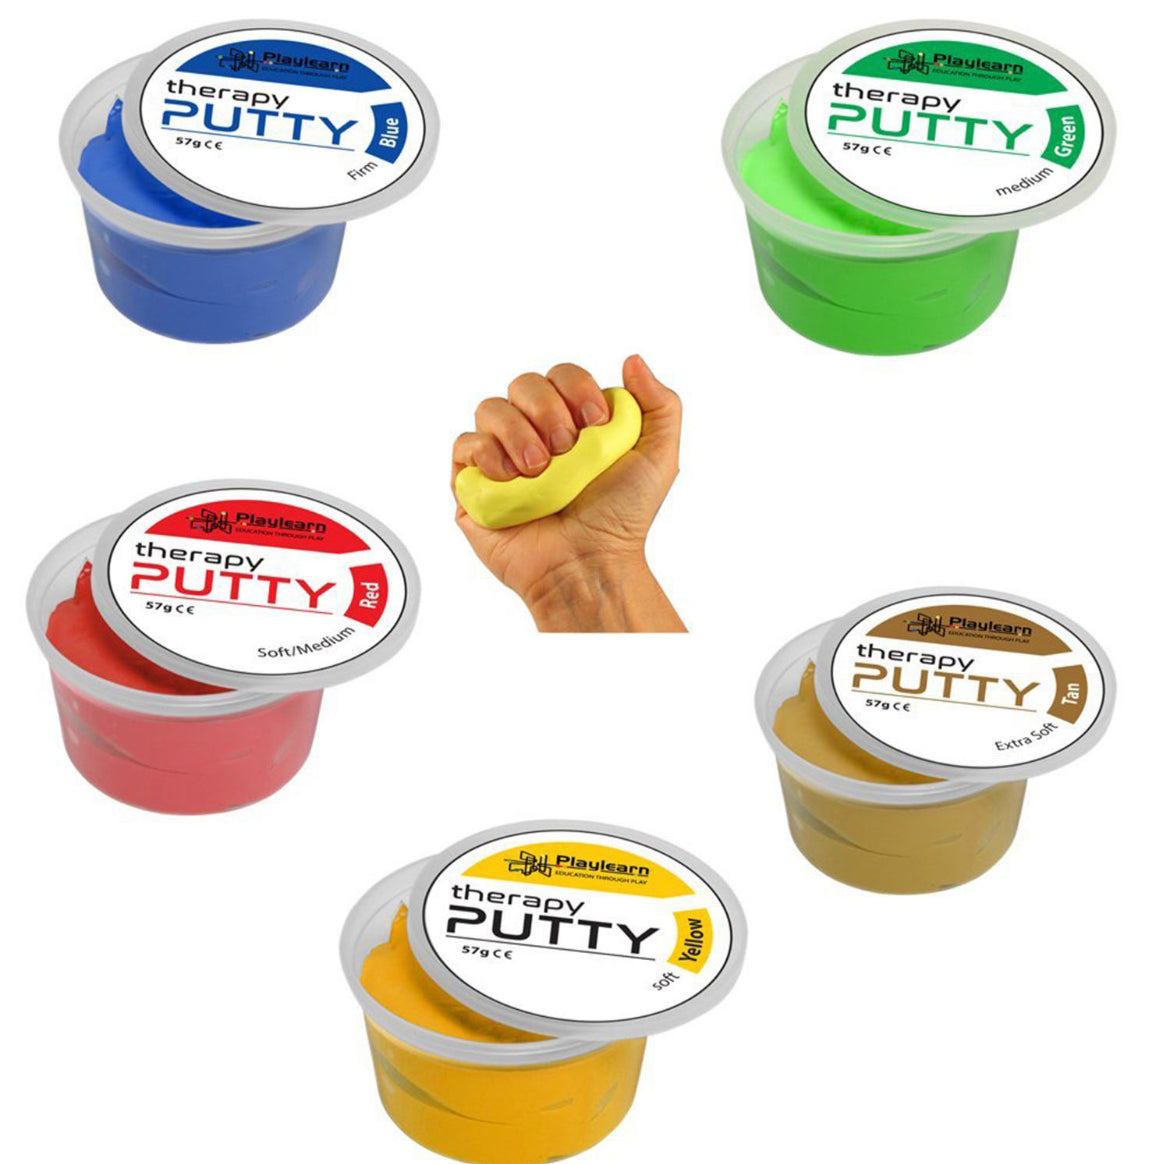 Therapy putty ( 5 Colours – 5 Strengths )